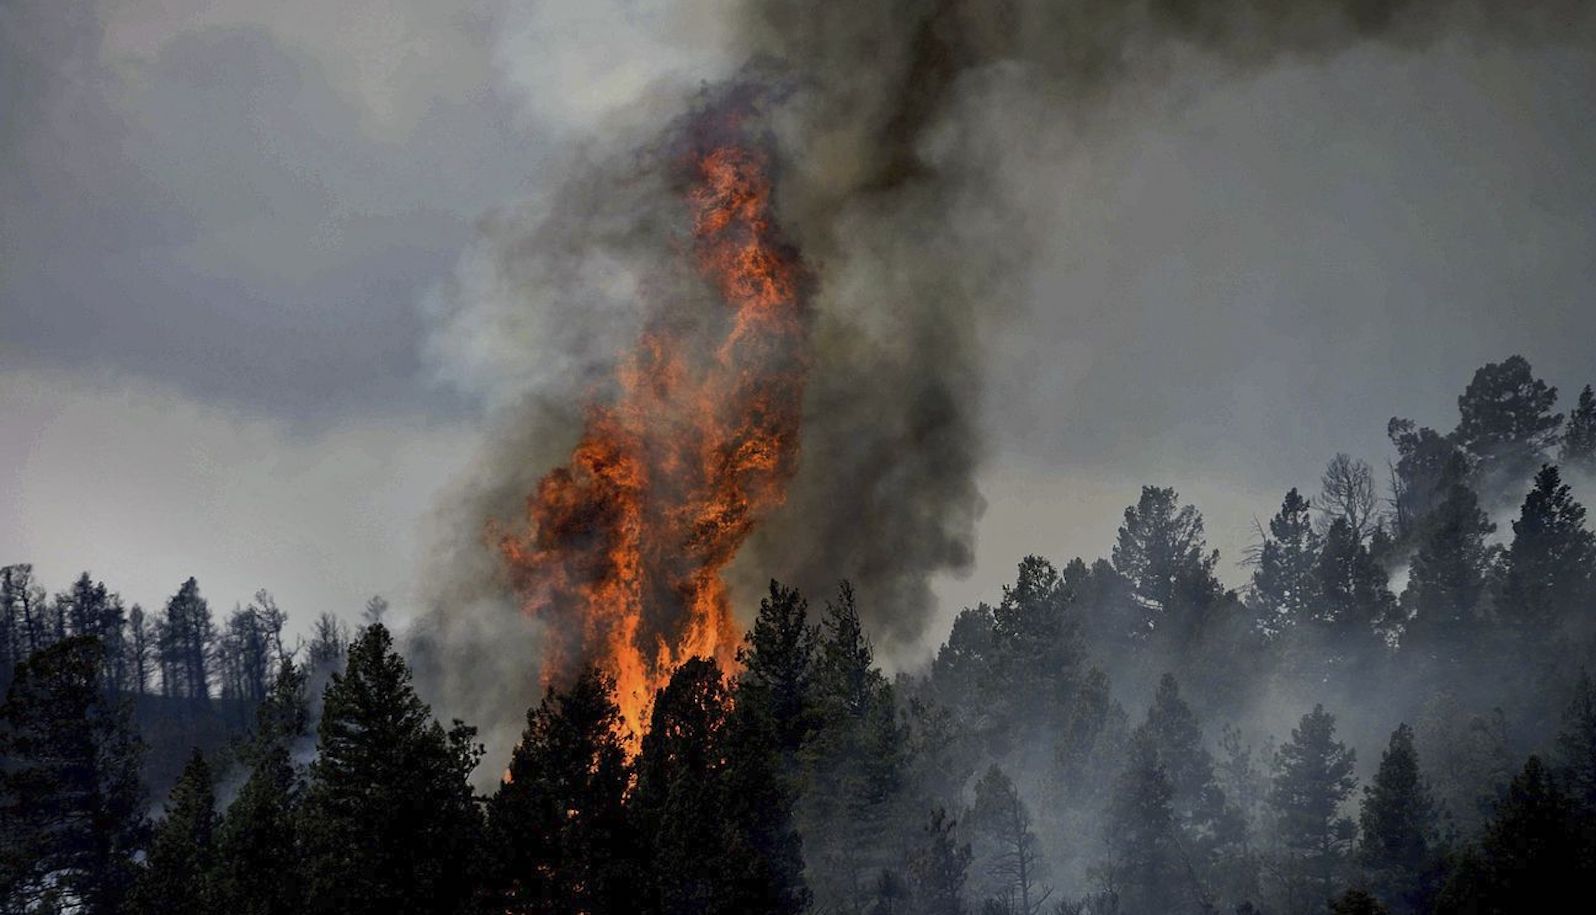 Dark grey image with trees that look black and with a big flames and smoke emerging